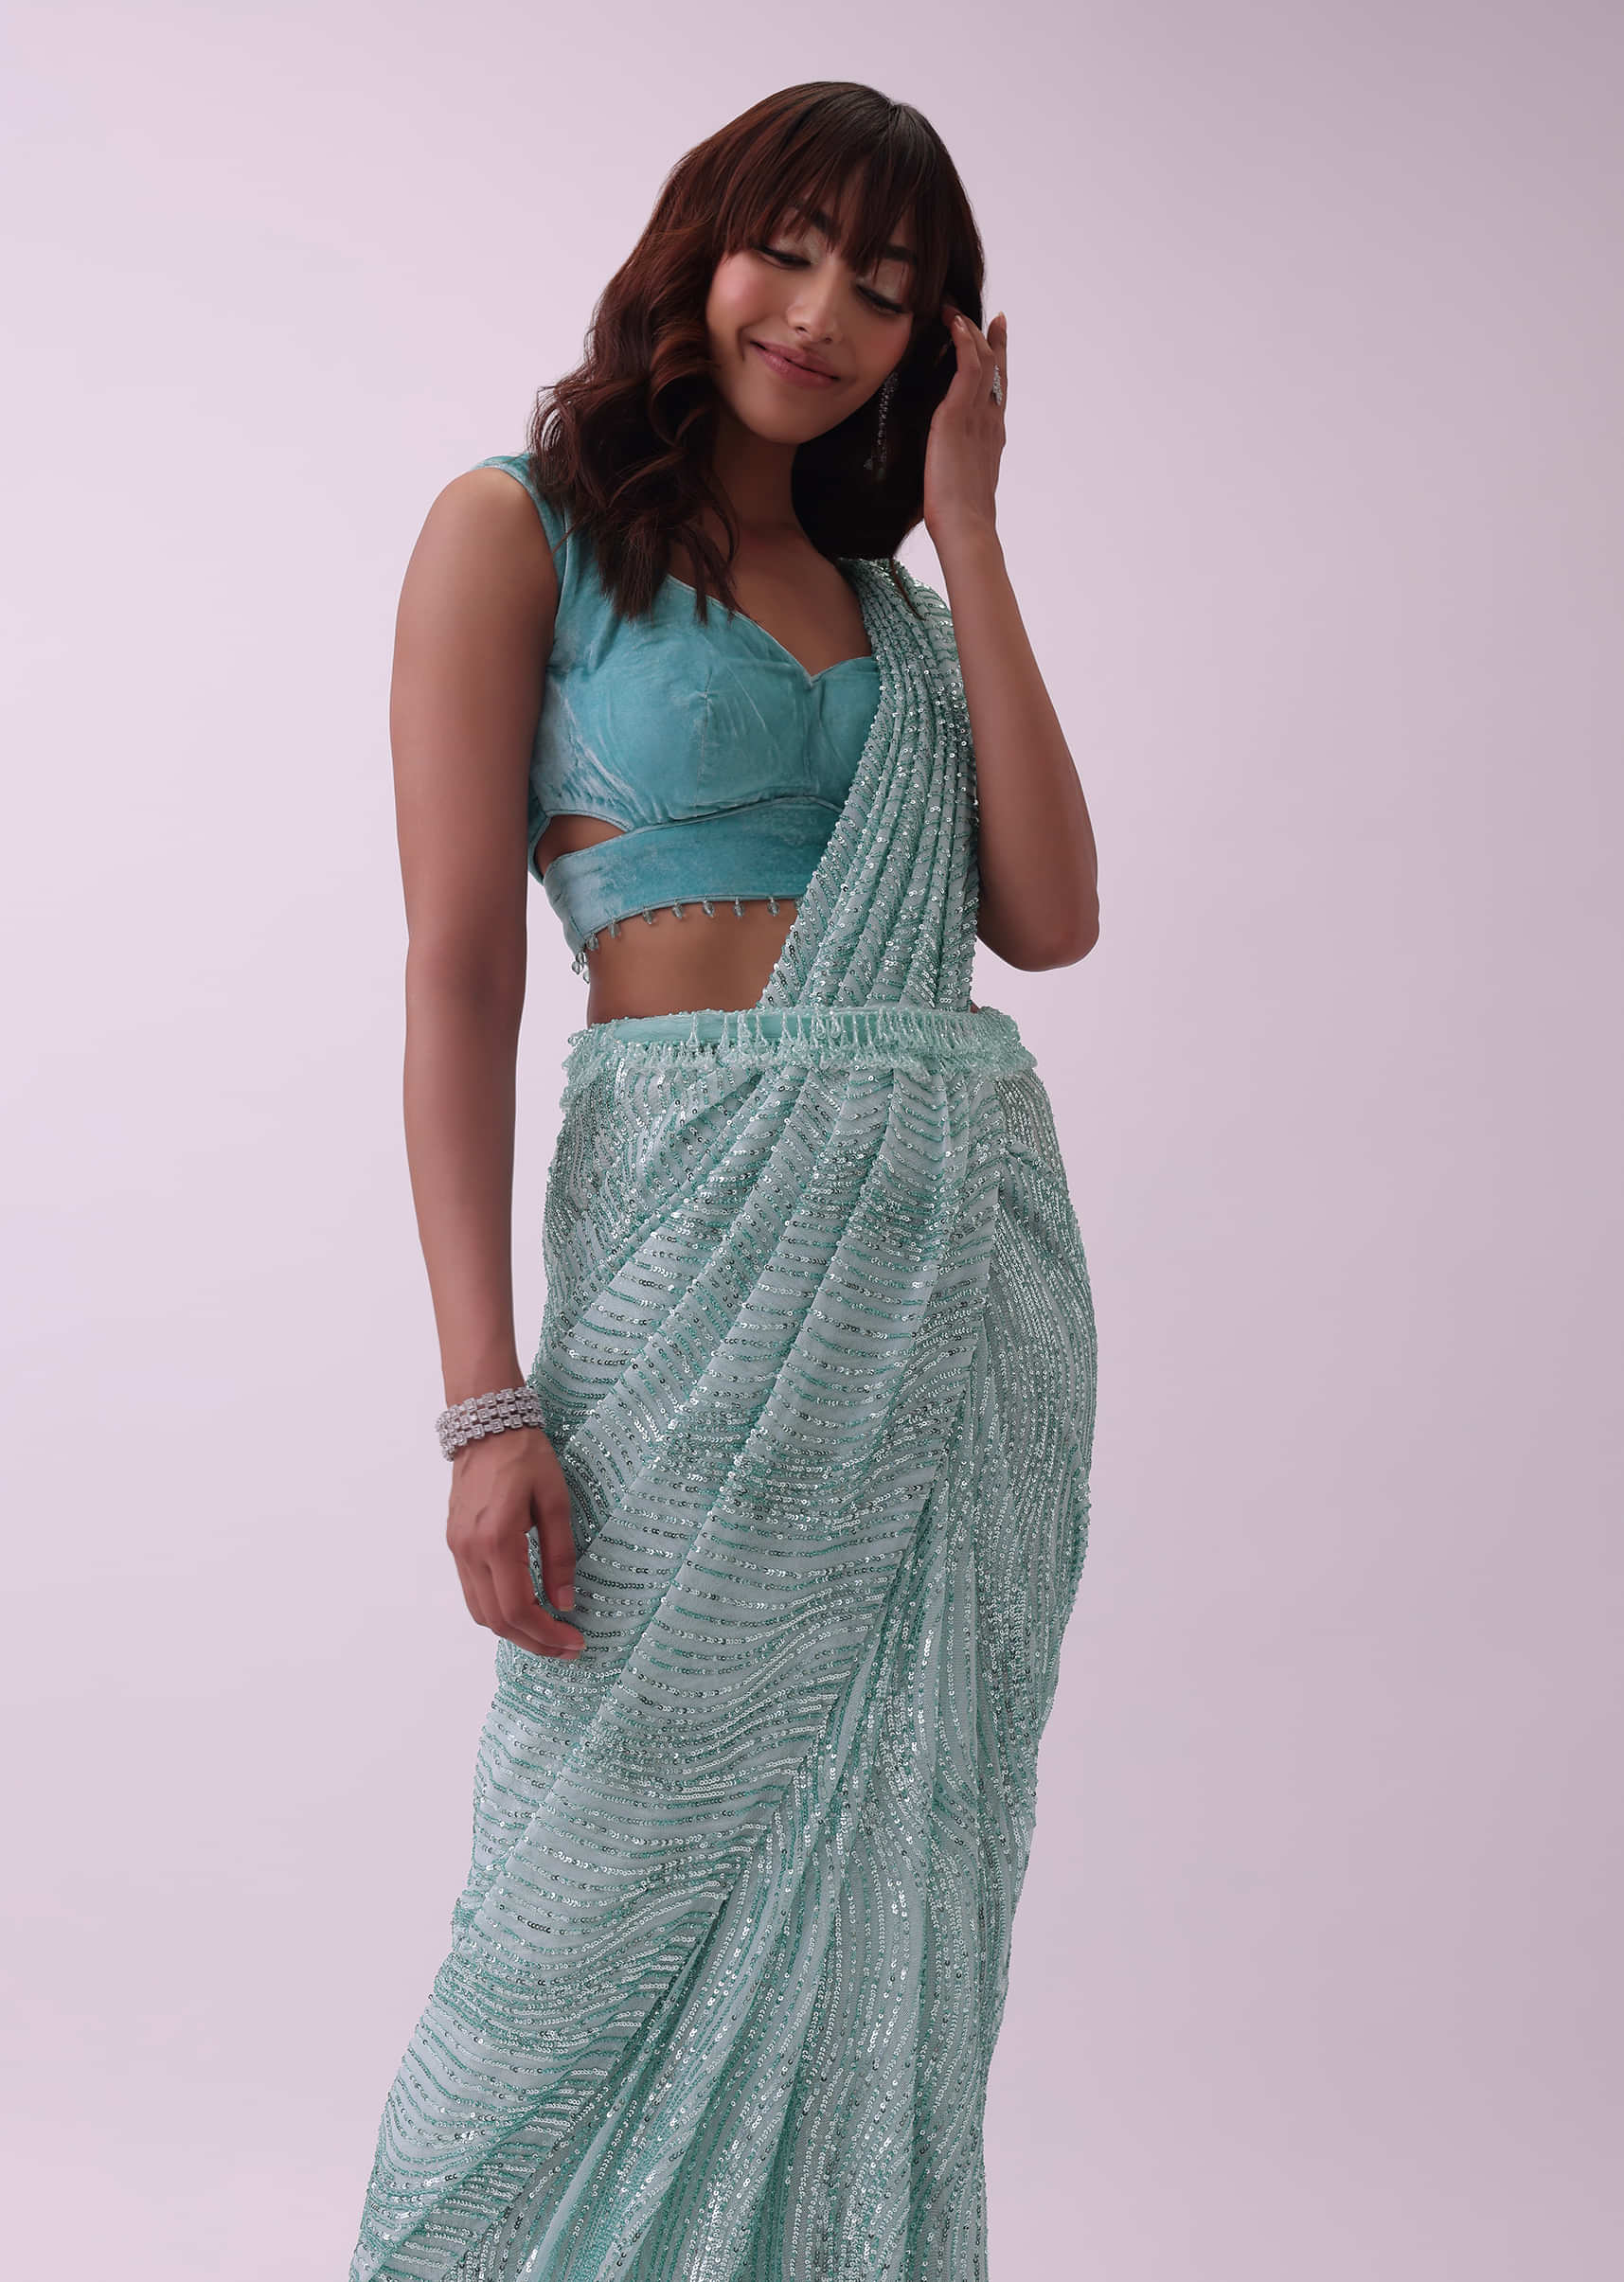 Aqua Blue Saree And Stitched Velvet Blouse With Hanging Crystals